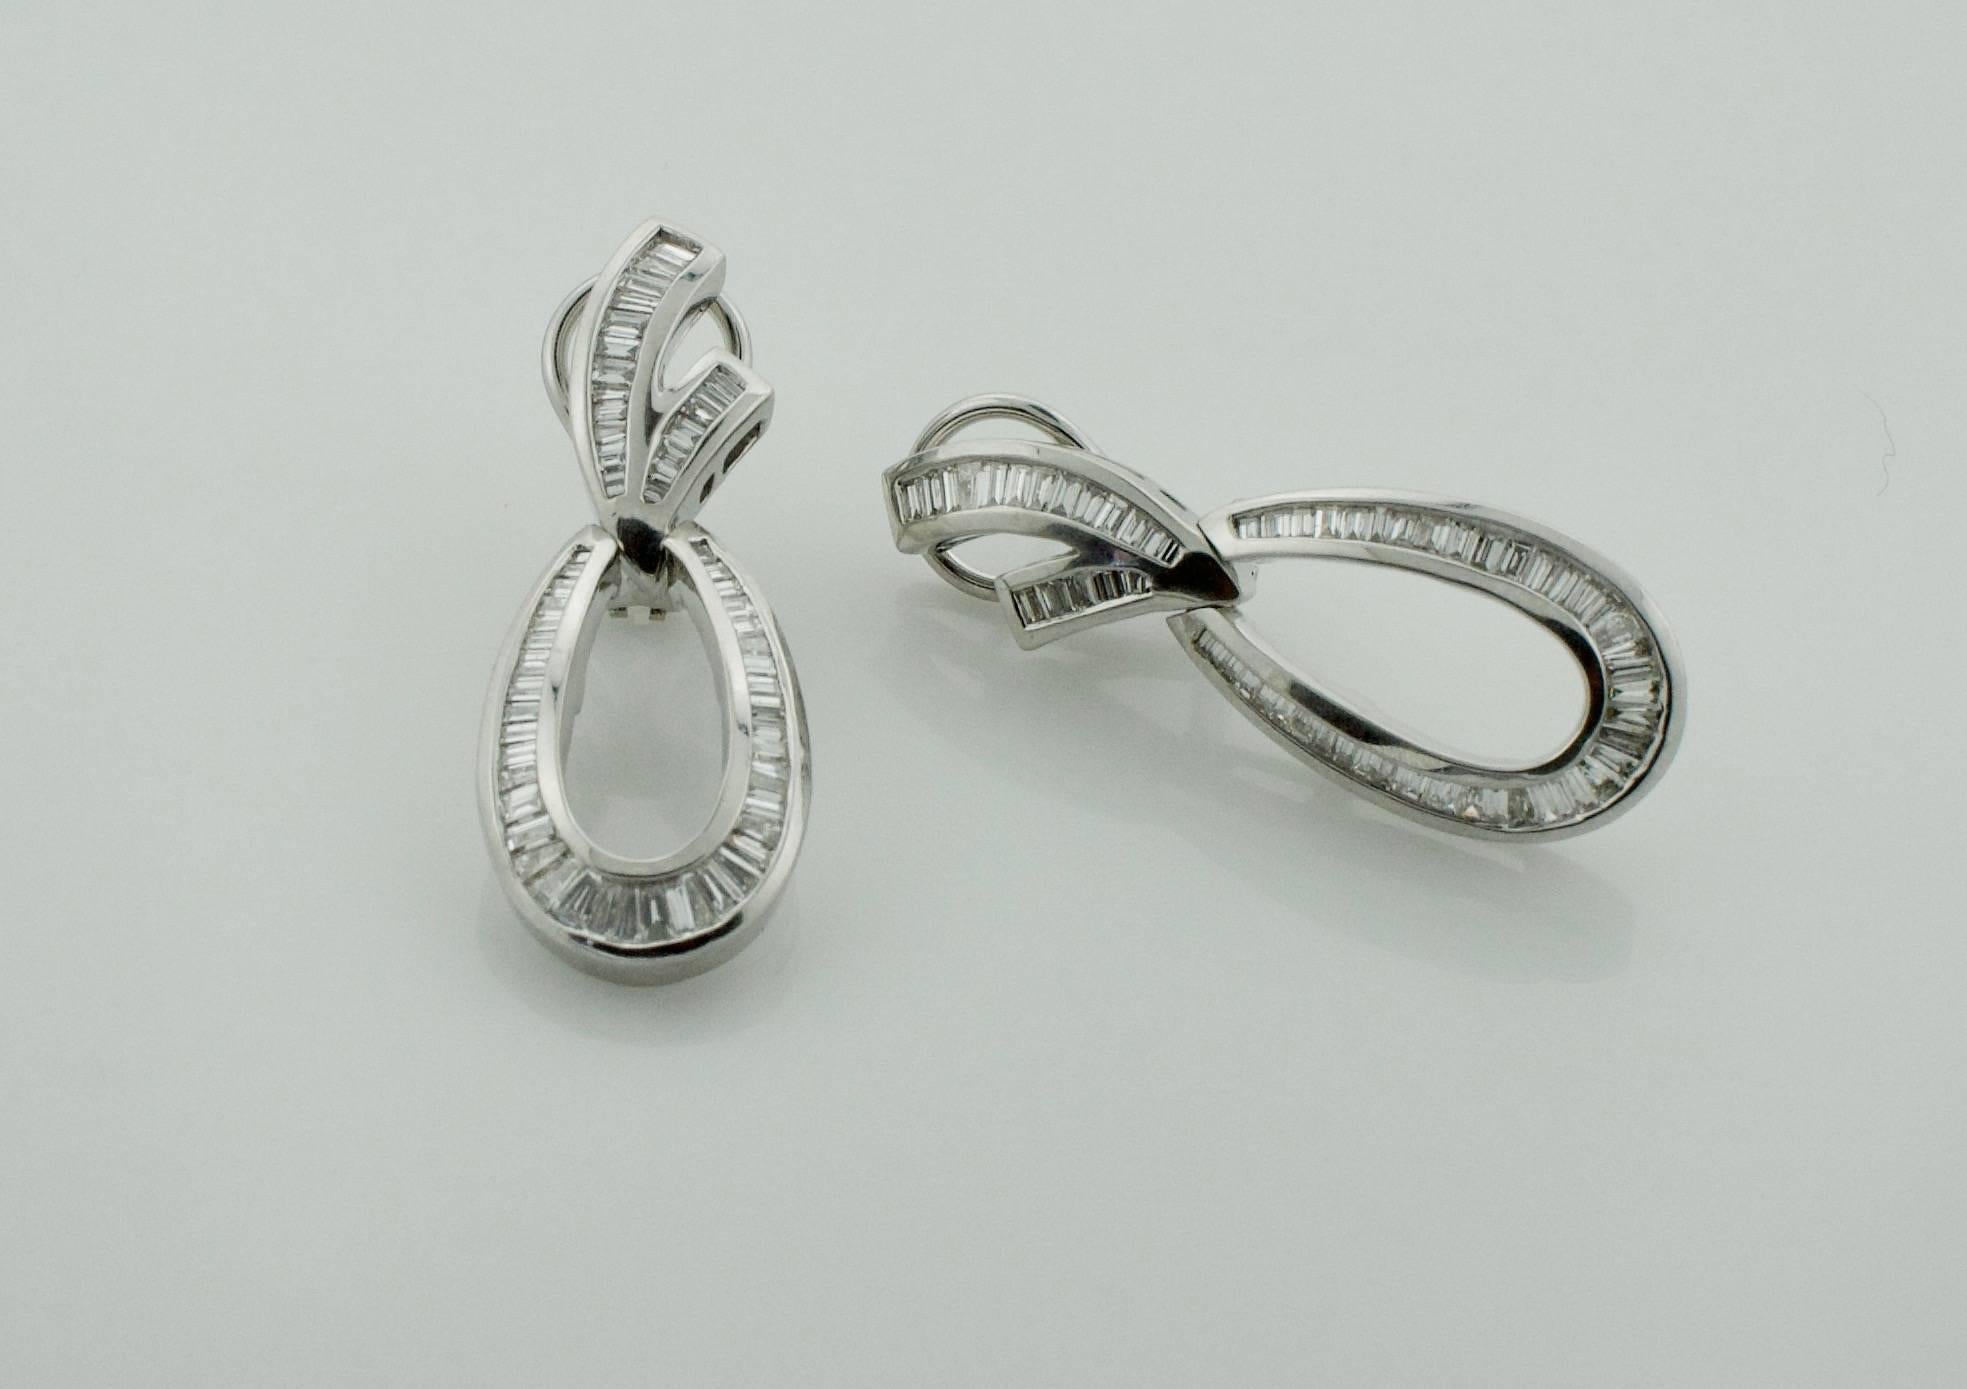 Dangling Diamond Baguette Earrings in White Gold 2.50 carats
One Hundred and Eighteen Round Brilliant Cut Diamonds weighing 2.50 carats approximately [GH VS-S!1]
The Bottom is Hinged and Swings!

